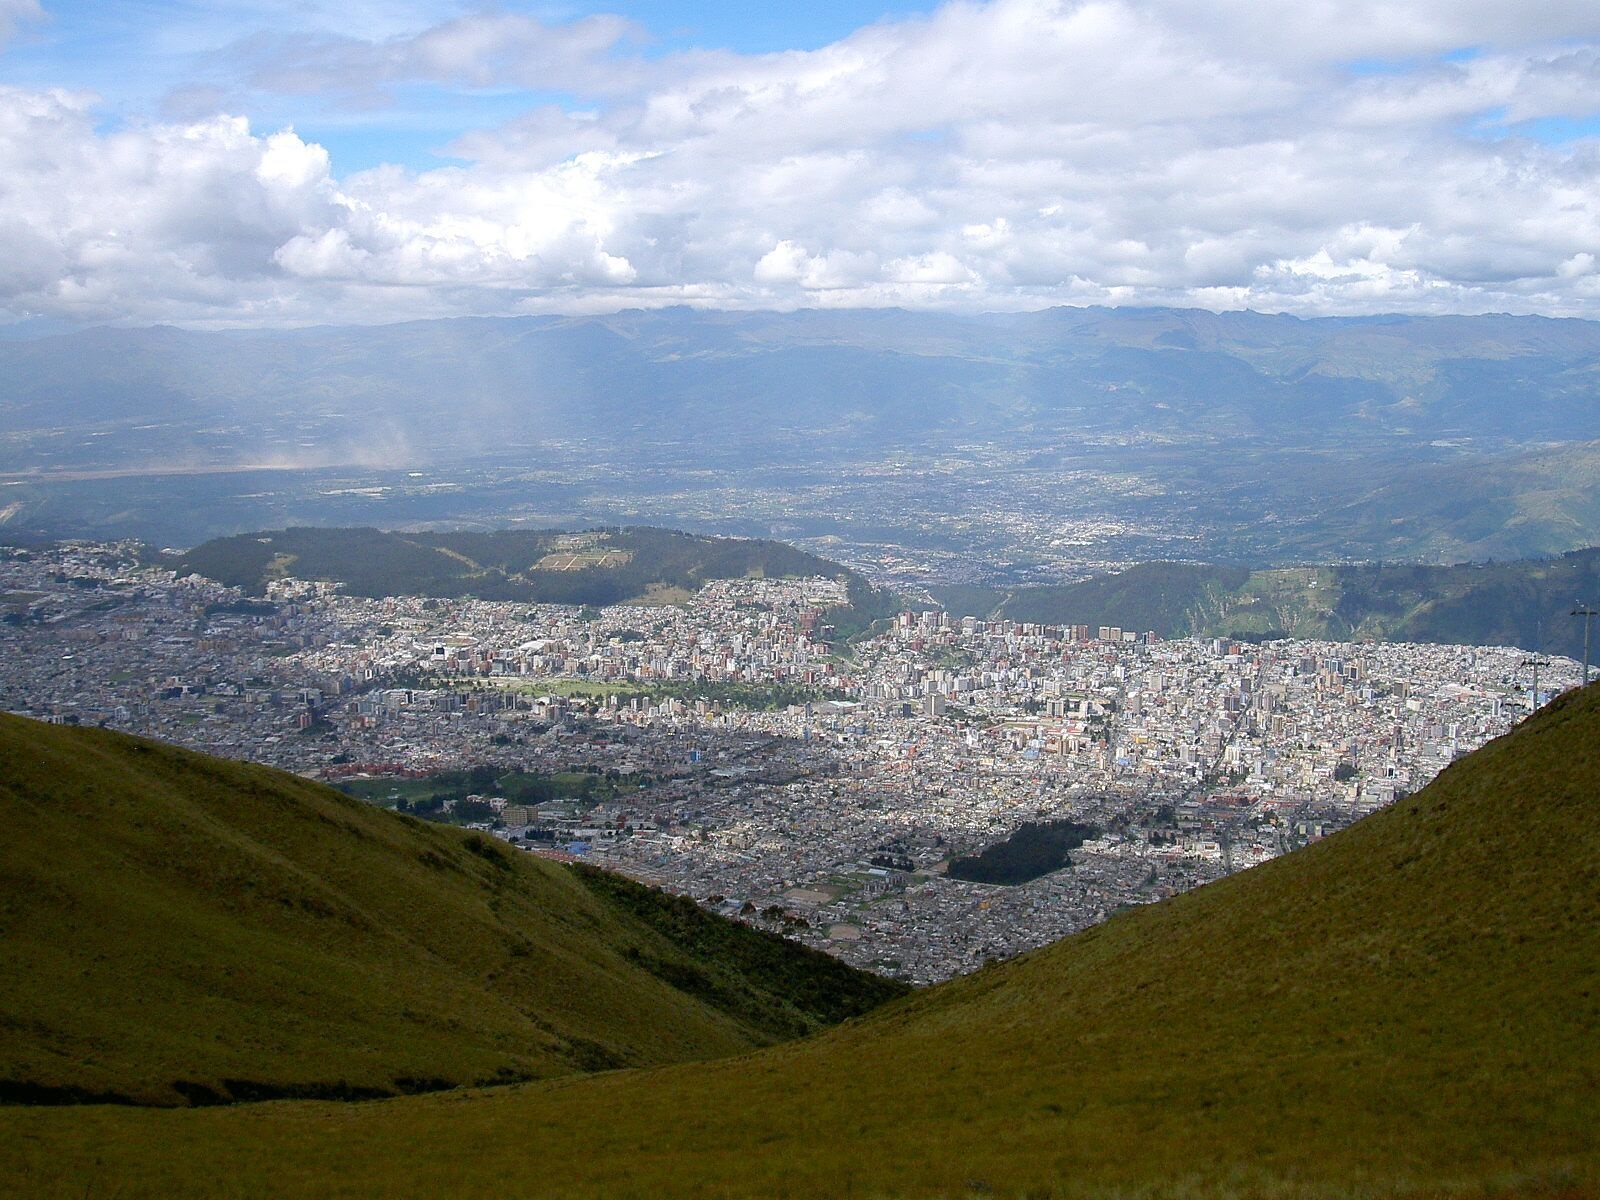 Quito and surrounding areas are heavily settled. A large eruption could put hundreds of thousands of lives at risk and would likely disrupt infrastructure, food and water. Image by Terpsichores under the Creative Commons Attribution-Share Alike 3.0 license. 